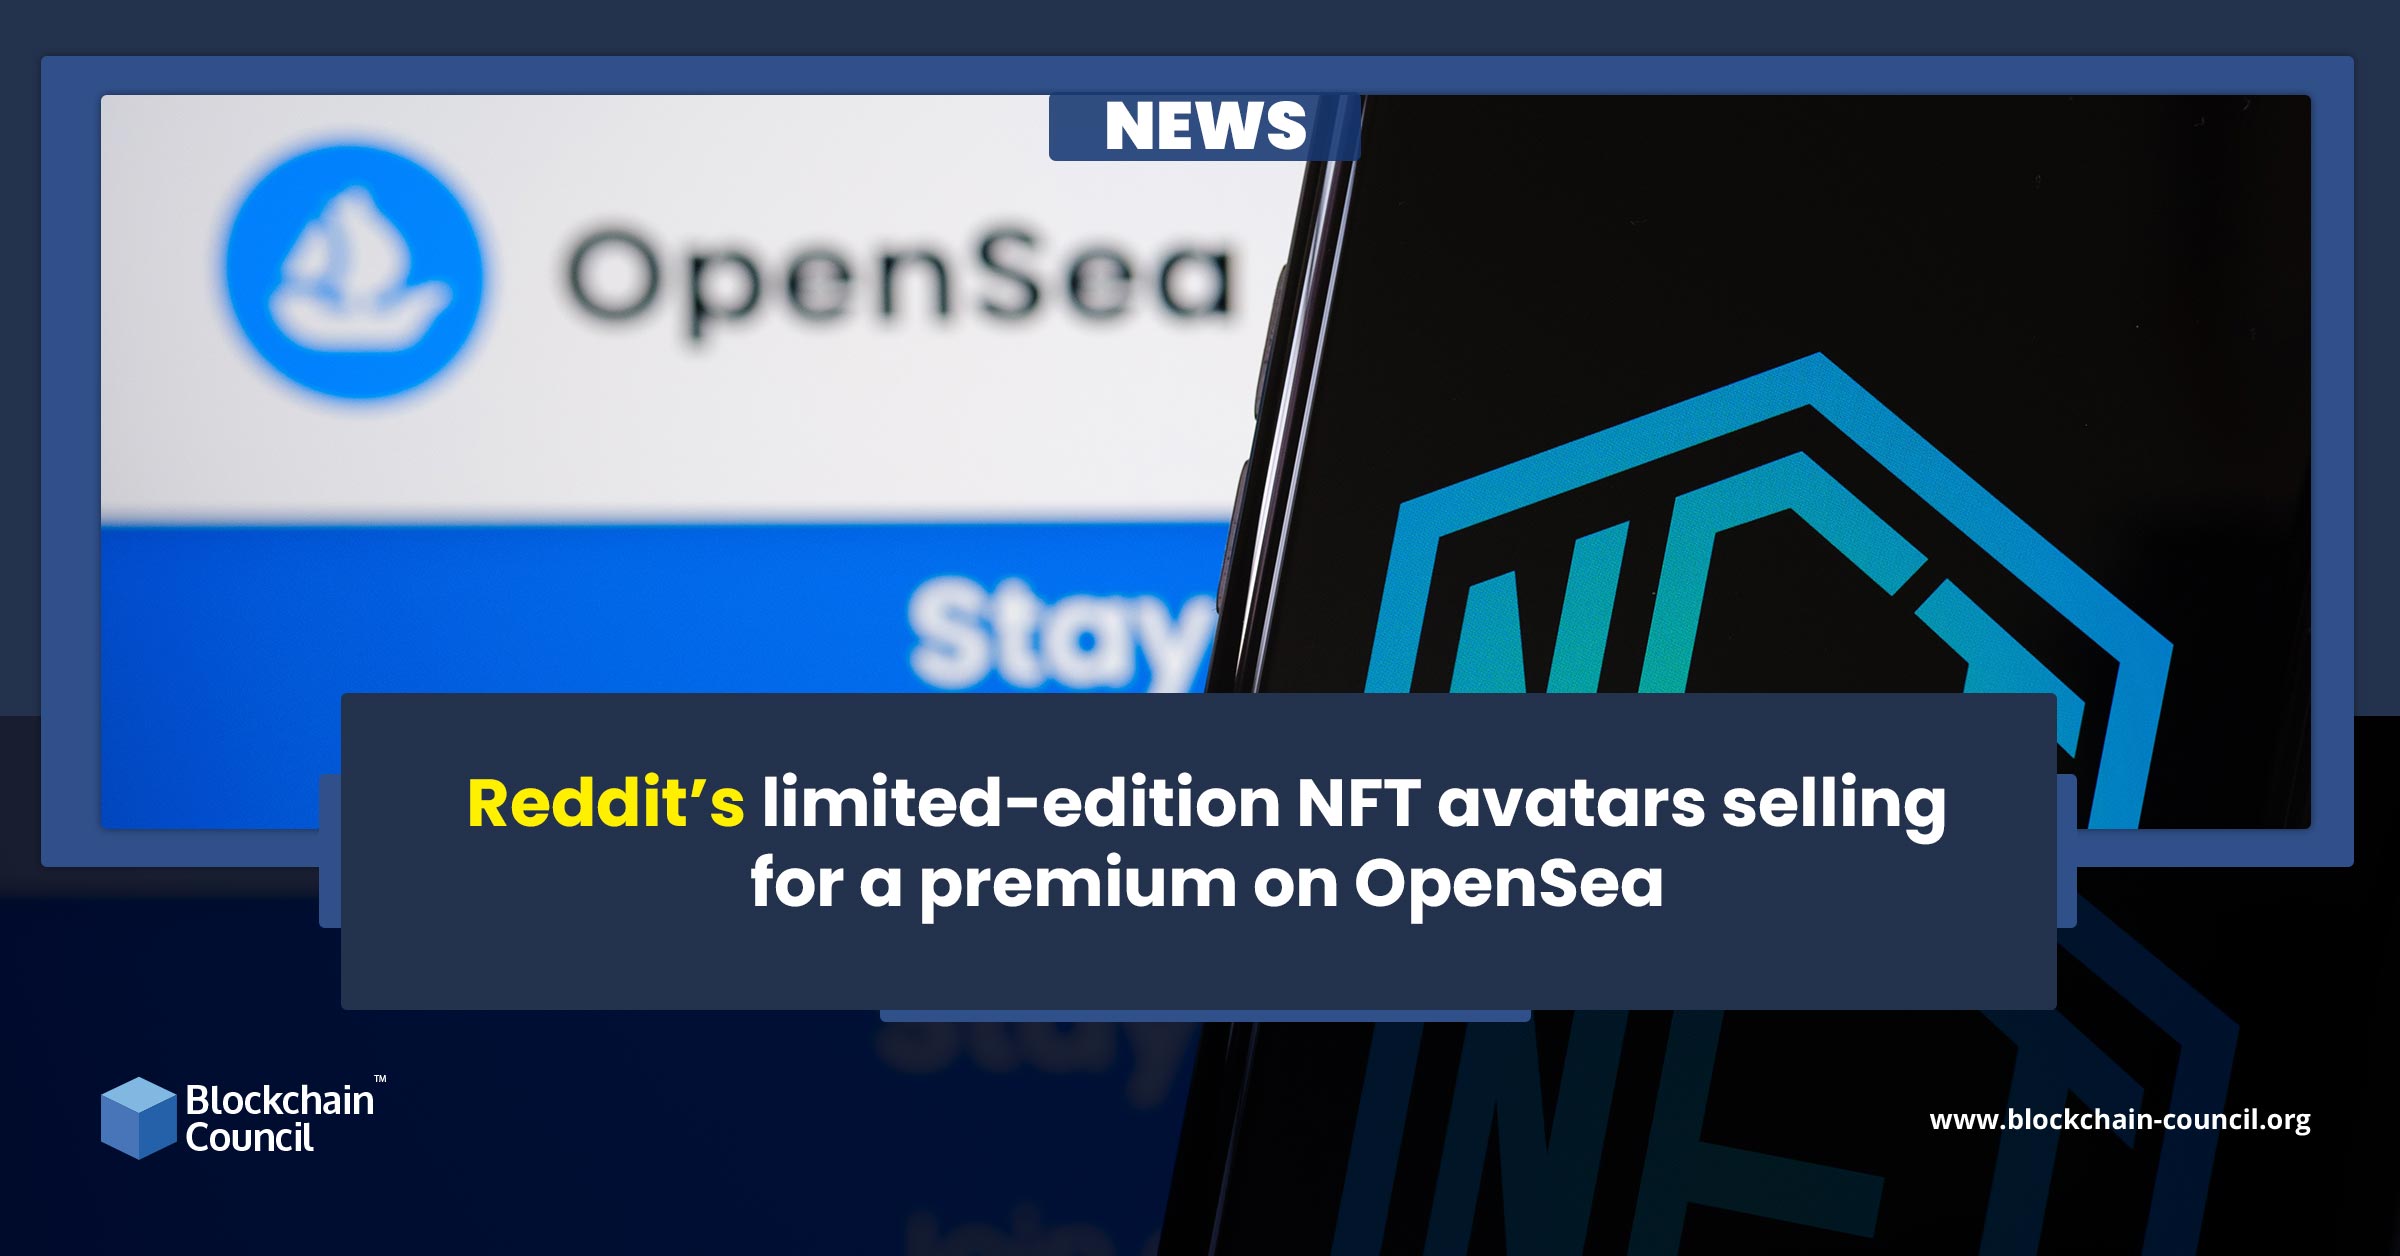 Reddit’s limited-edition NFT avatars selling for a premium on OpenSea